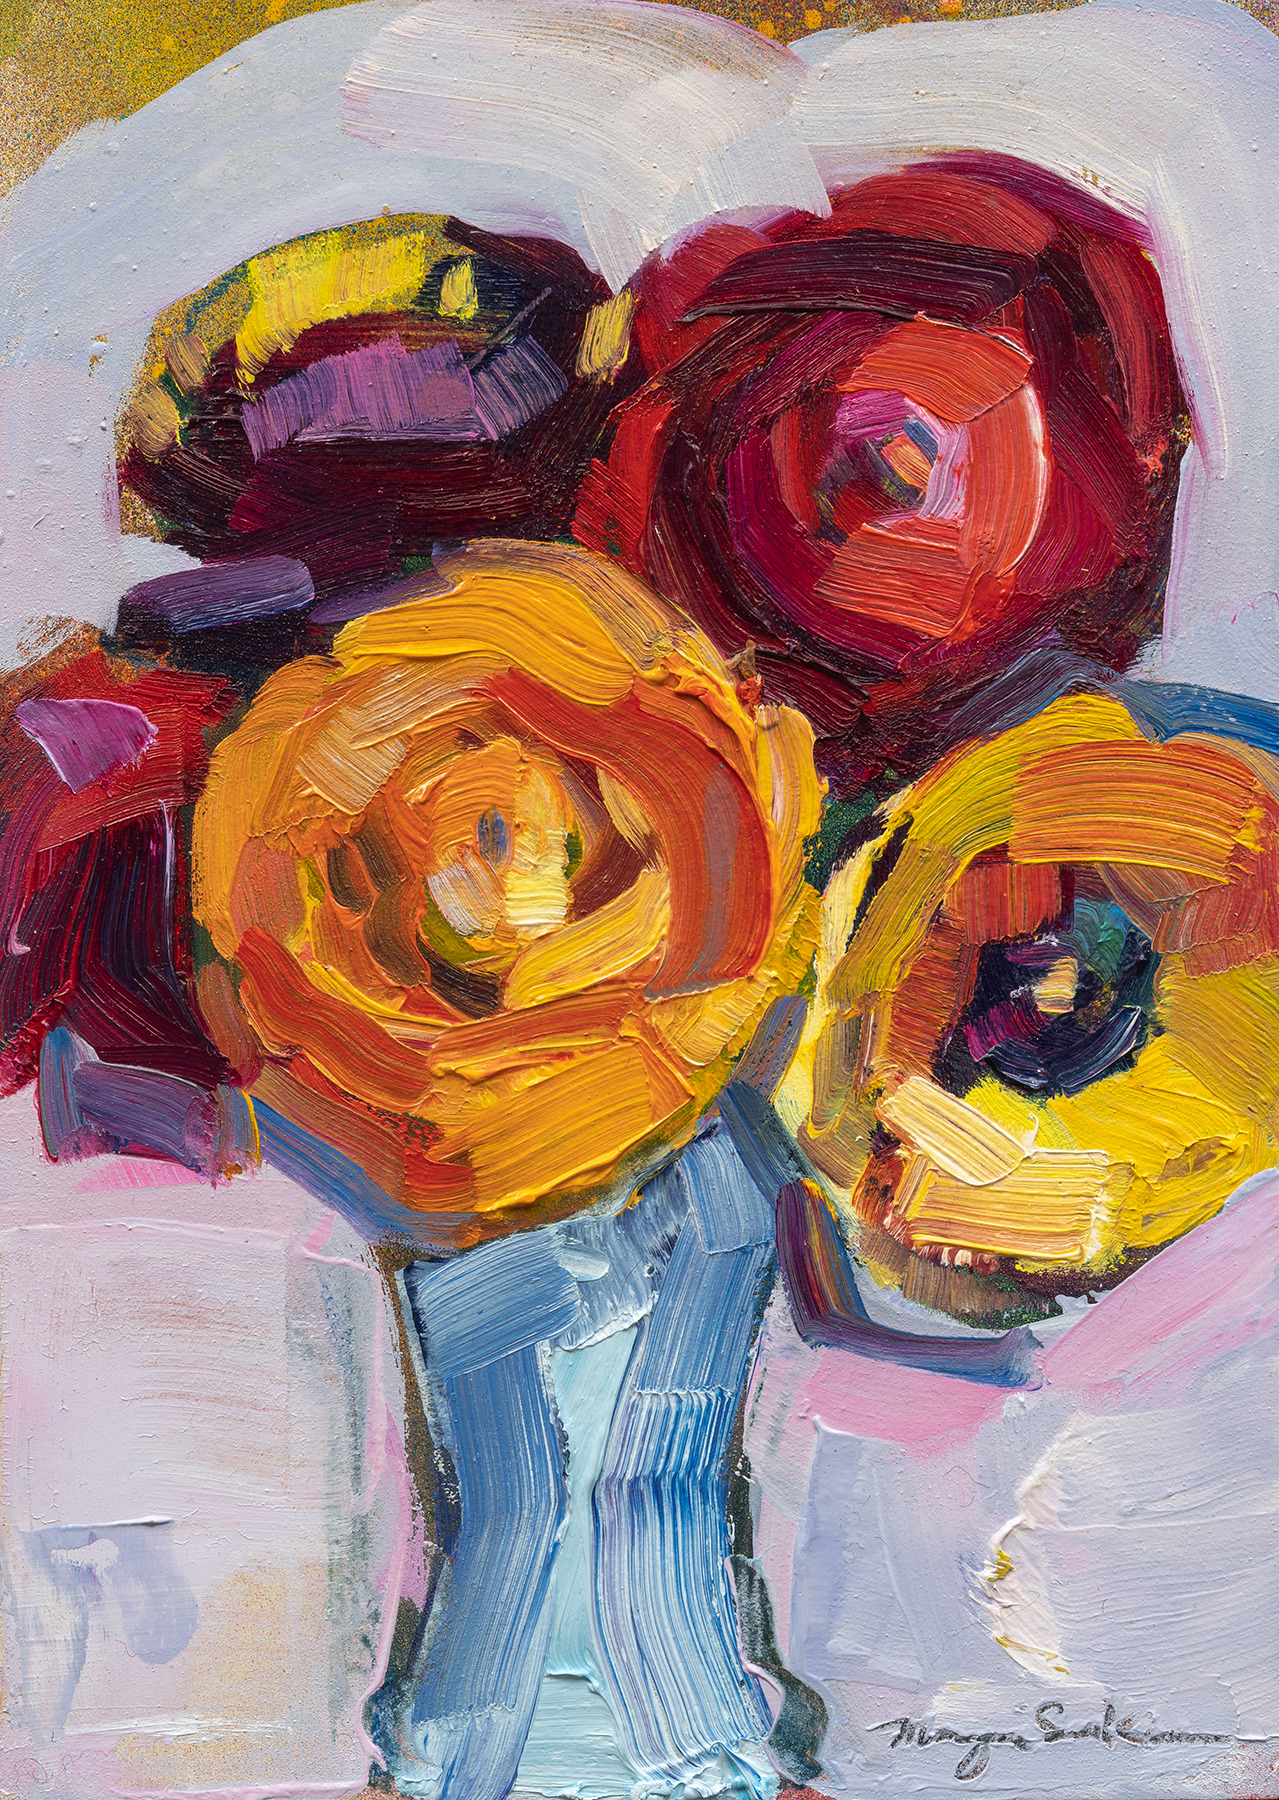 Together still life with mixed ranunculus bouquet 2 oil on wood 7x5 dfz2fz